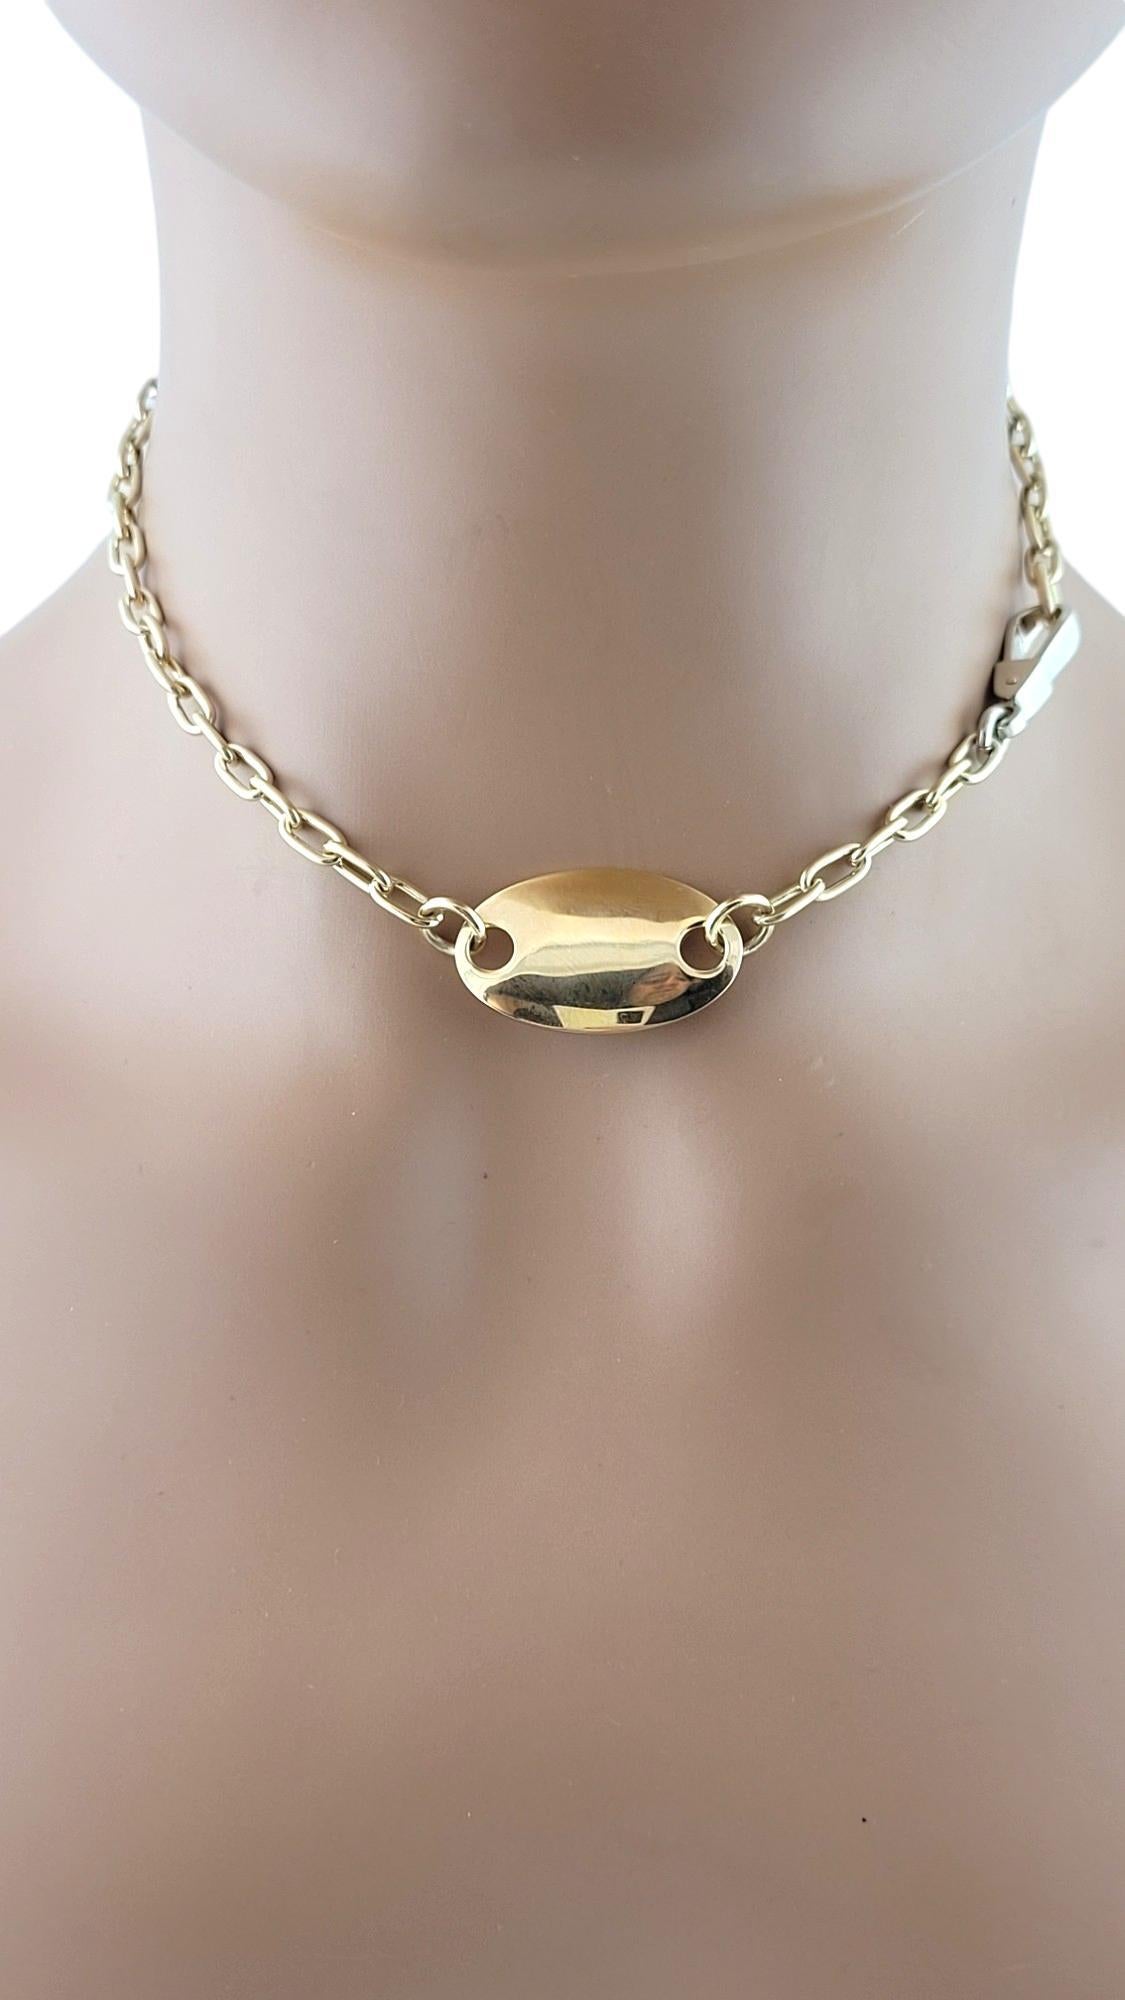 18K Yellow Gold Pomellato ID Chain Link Necklace #16123 For Sale 2